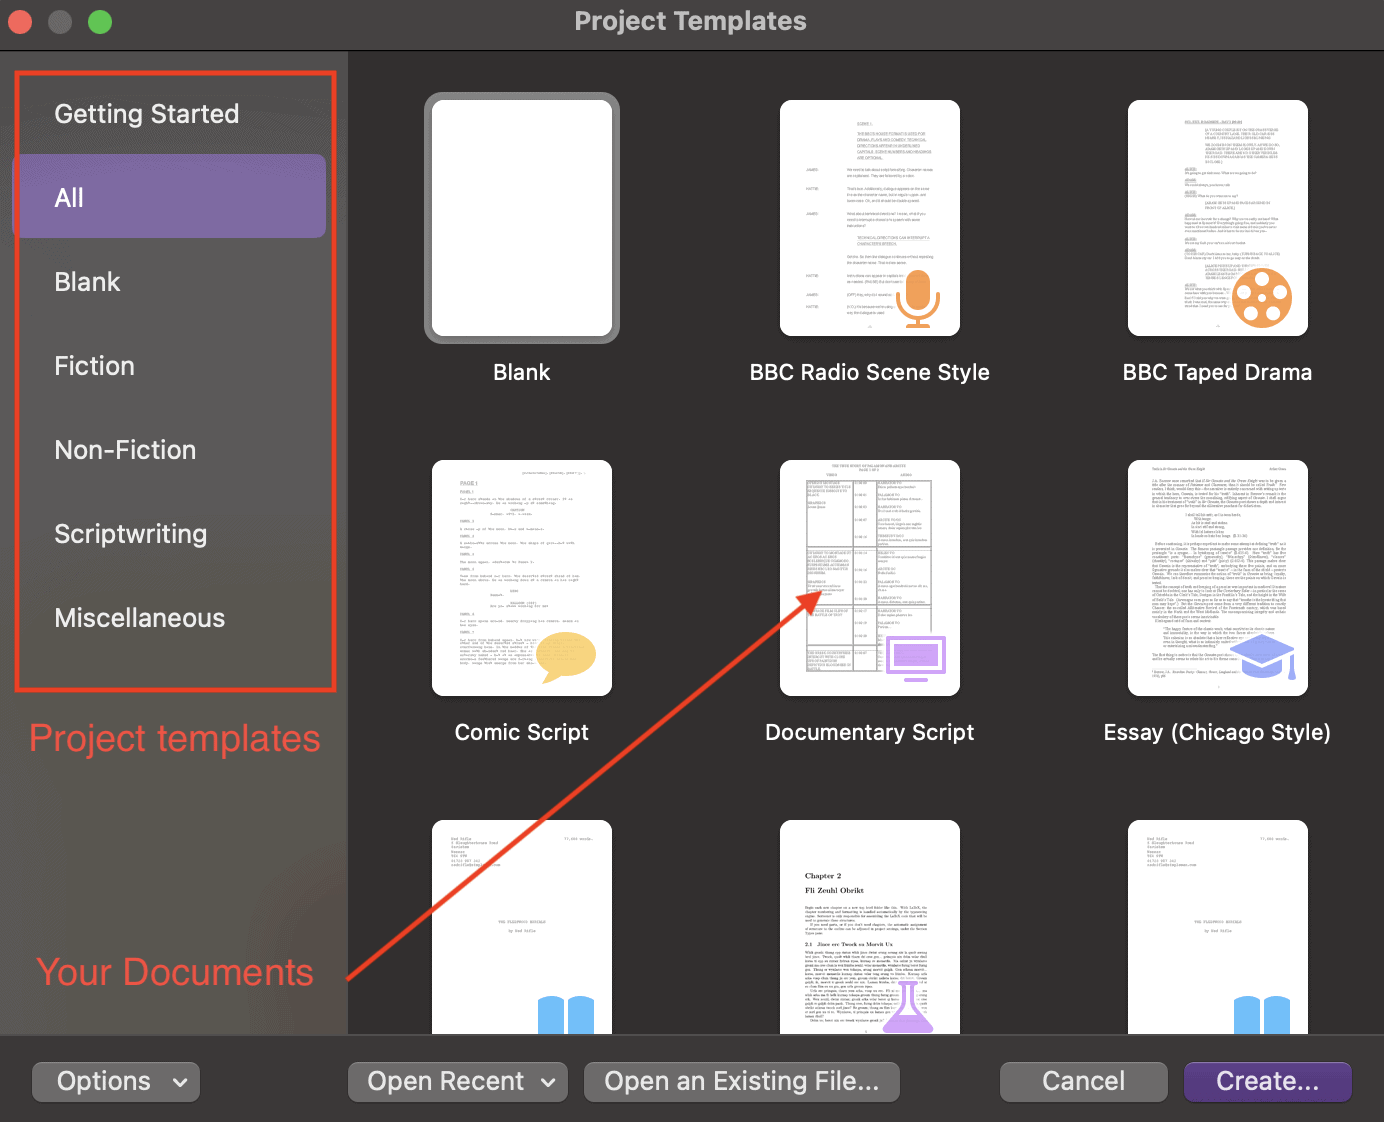 Integrated feature dashboard of Scrivener highlighting project templates like "Blank", "Fiction", "Non-Fiction" etc.